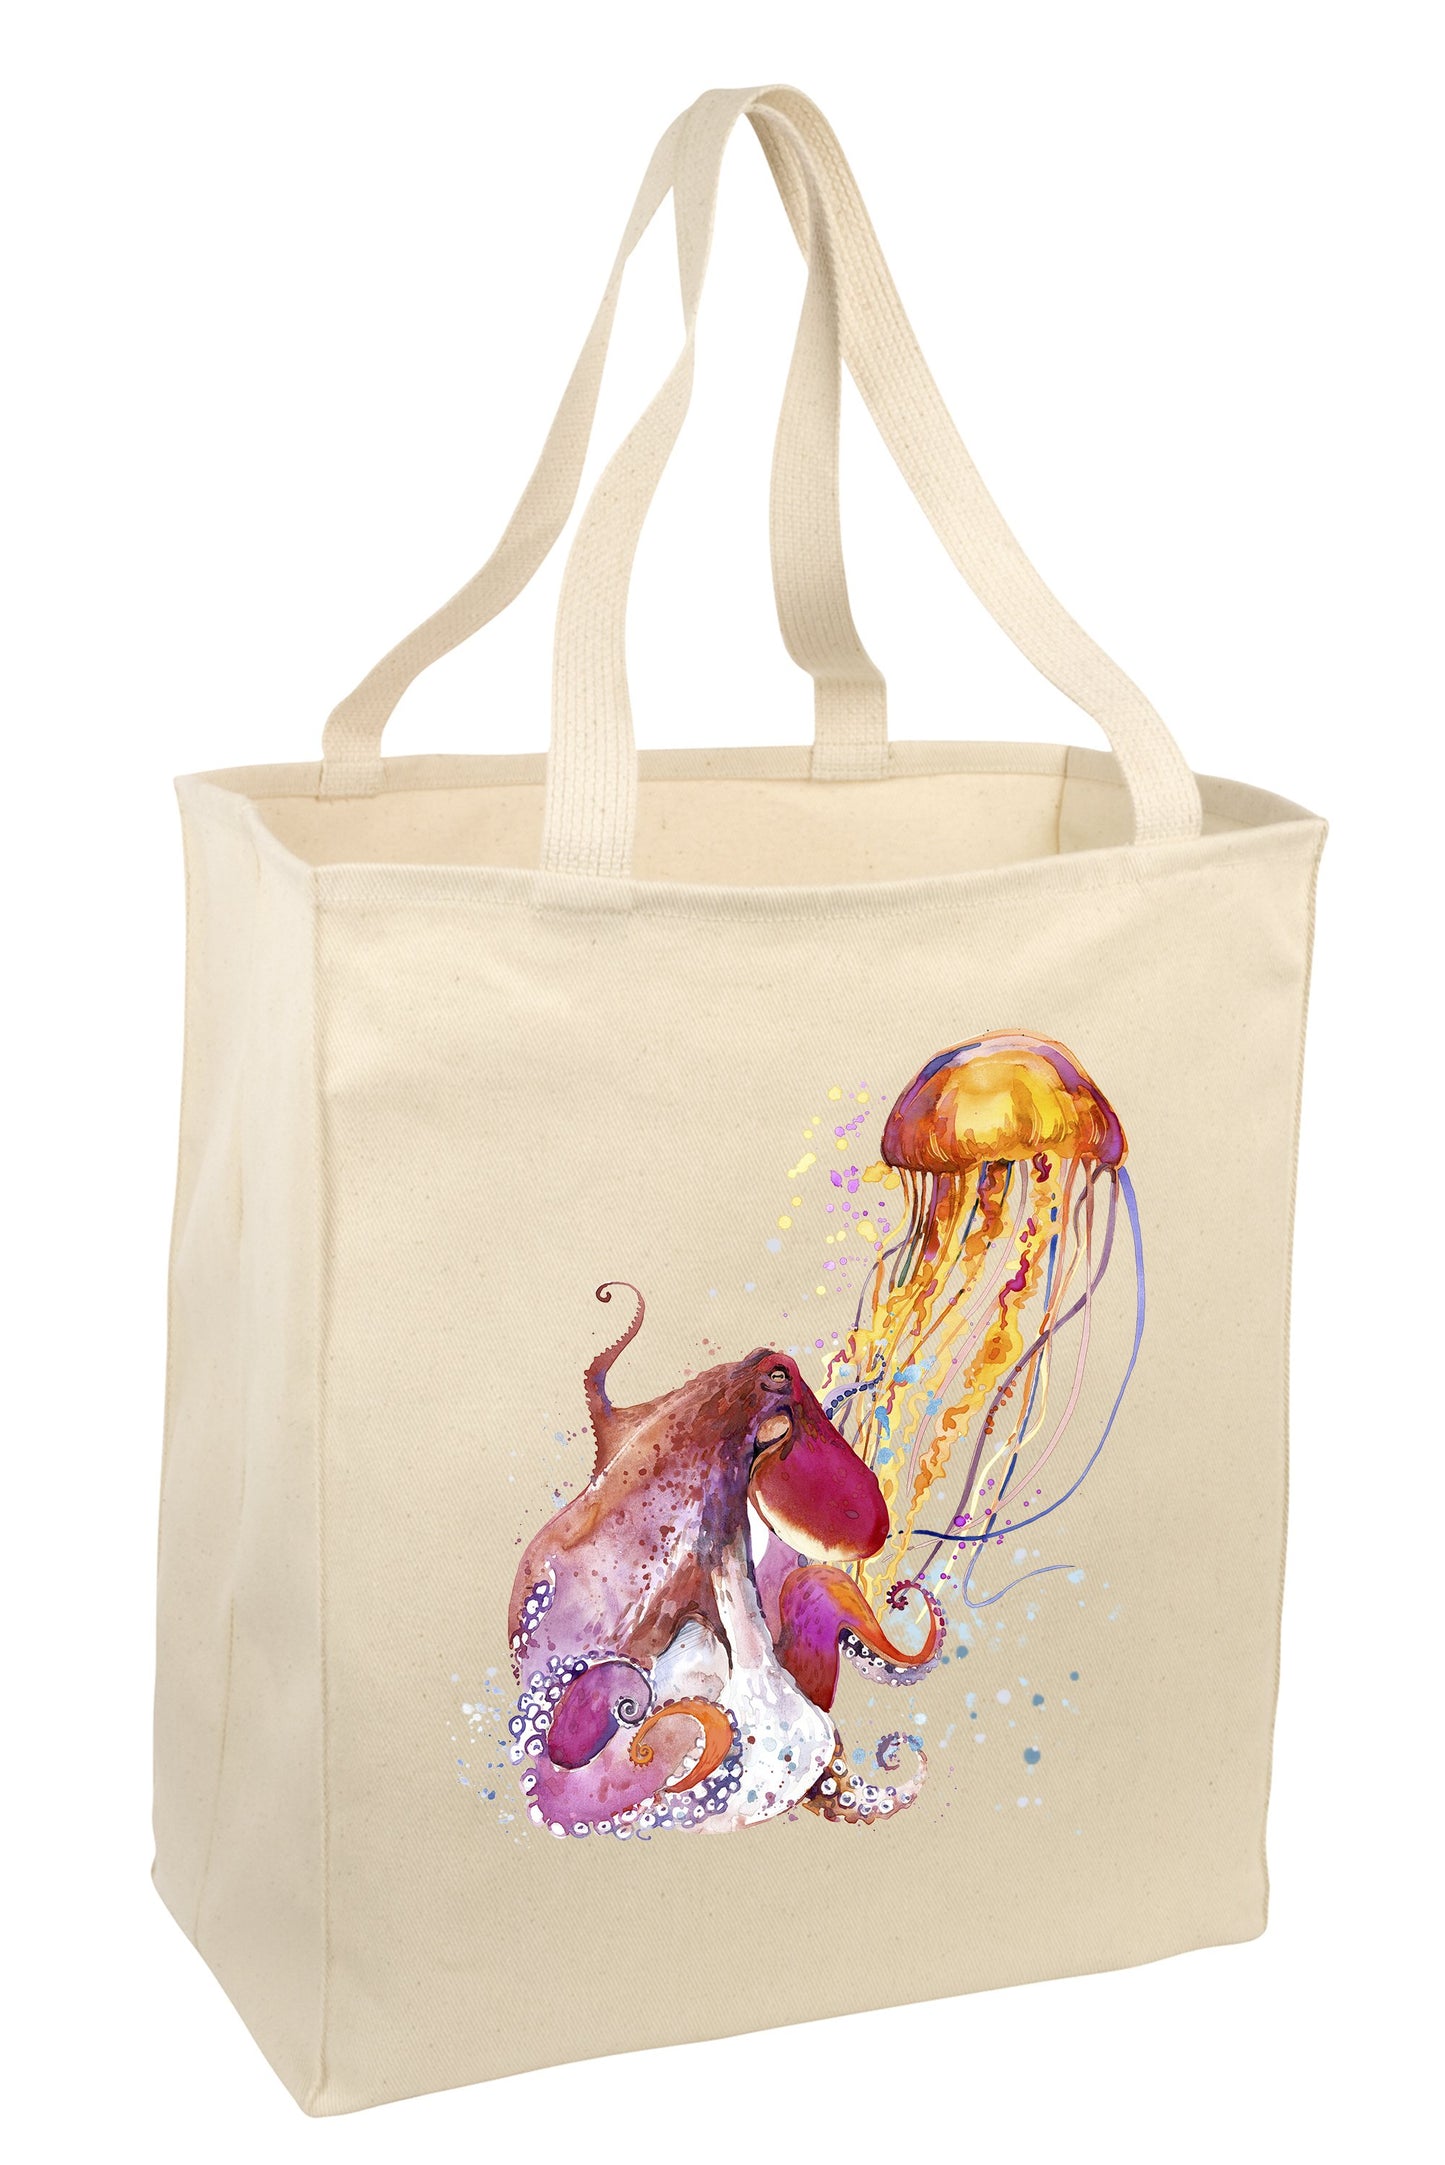 Over the Shoulder Beach Summer Tote Bag. Durable 100% Cotton and 22" Long Handle Shopping Bag. (Jellyfish)